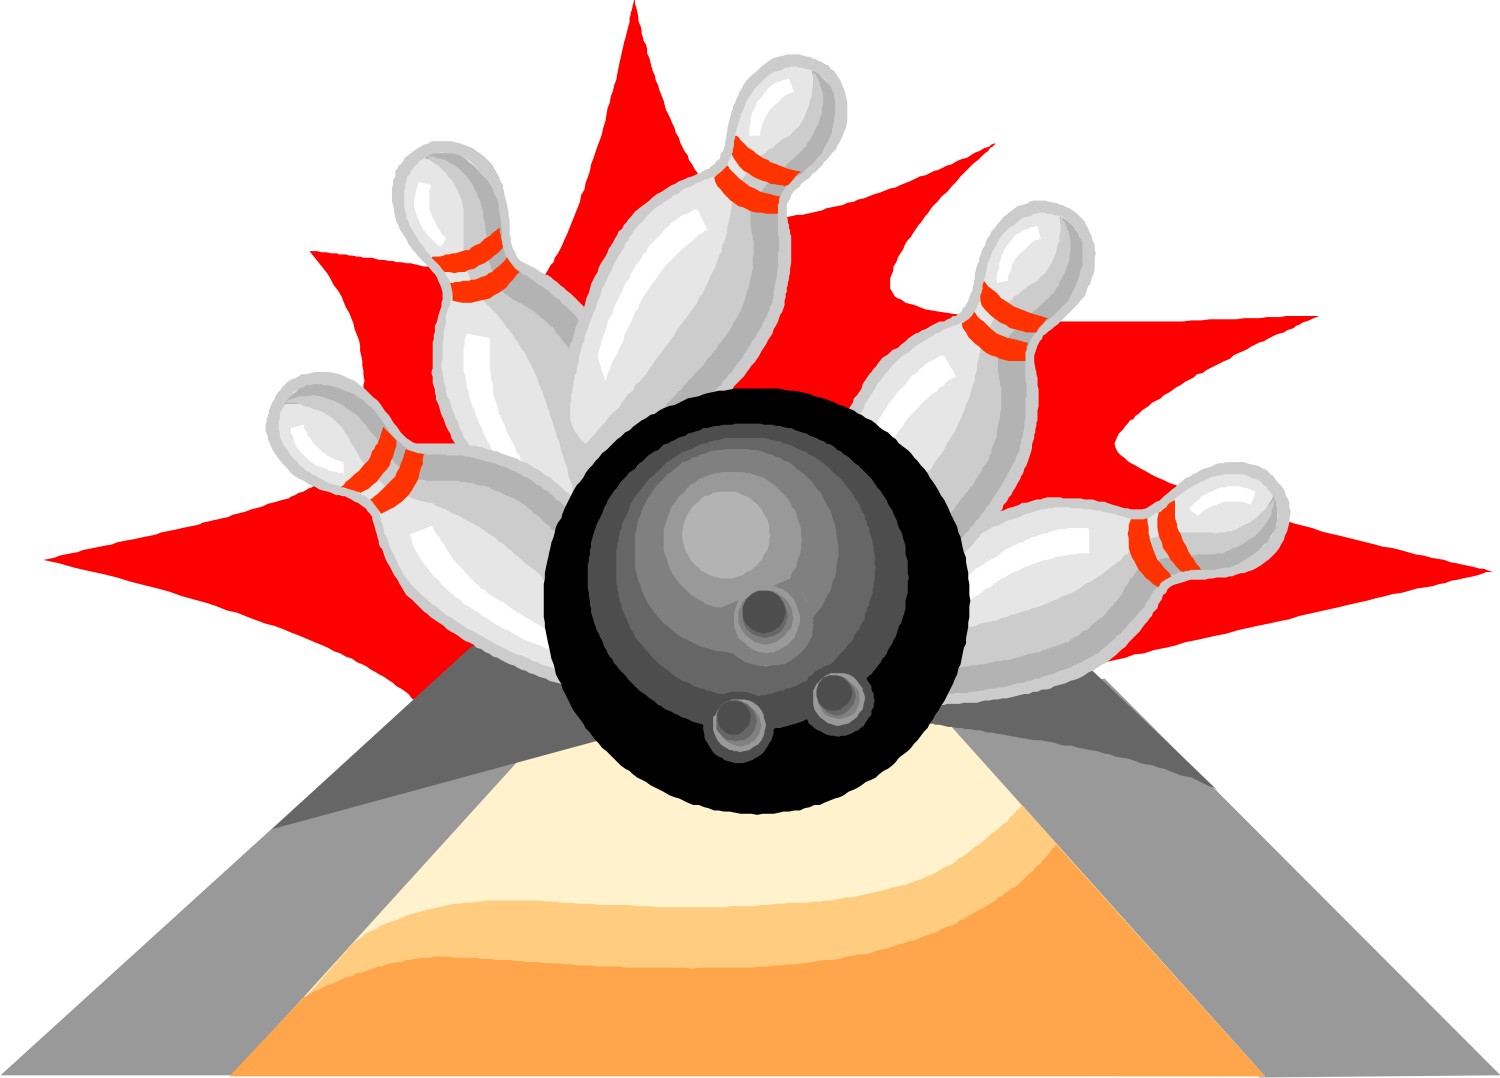 Free Holiday Bowling Cliparts, Download Free Clip Art, Free